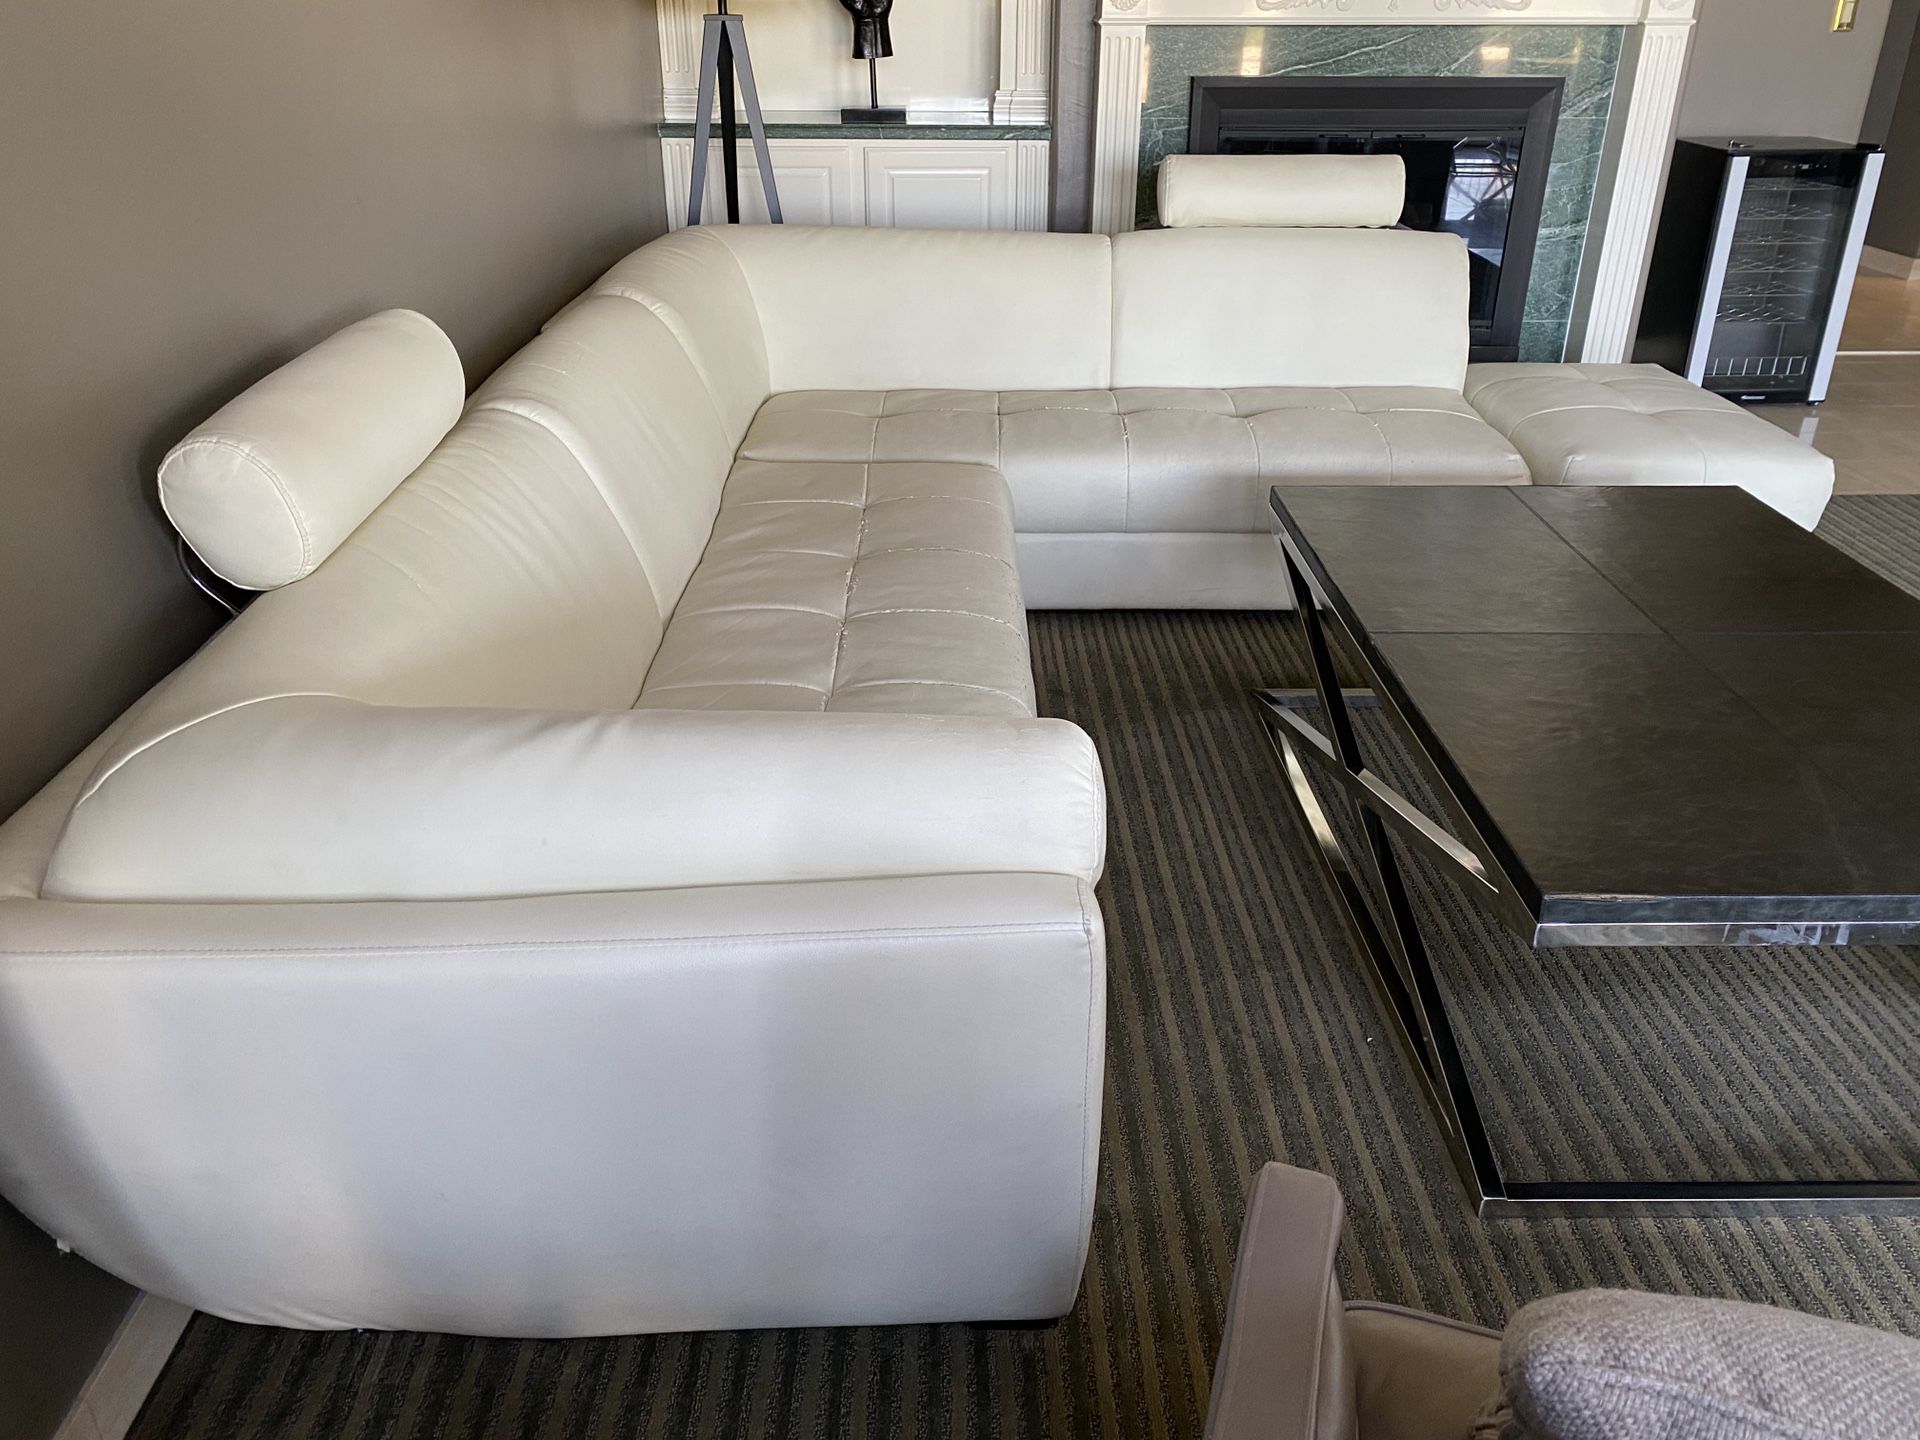 White leather sectional couch